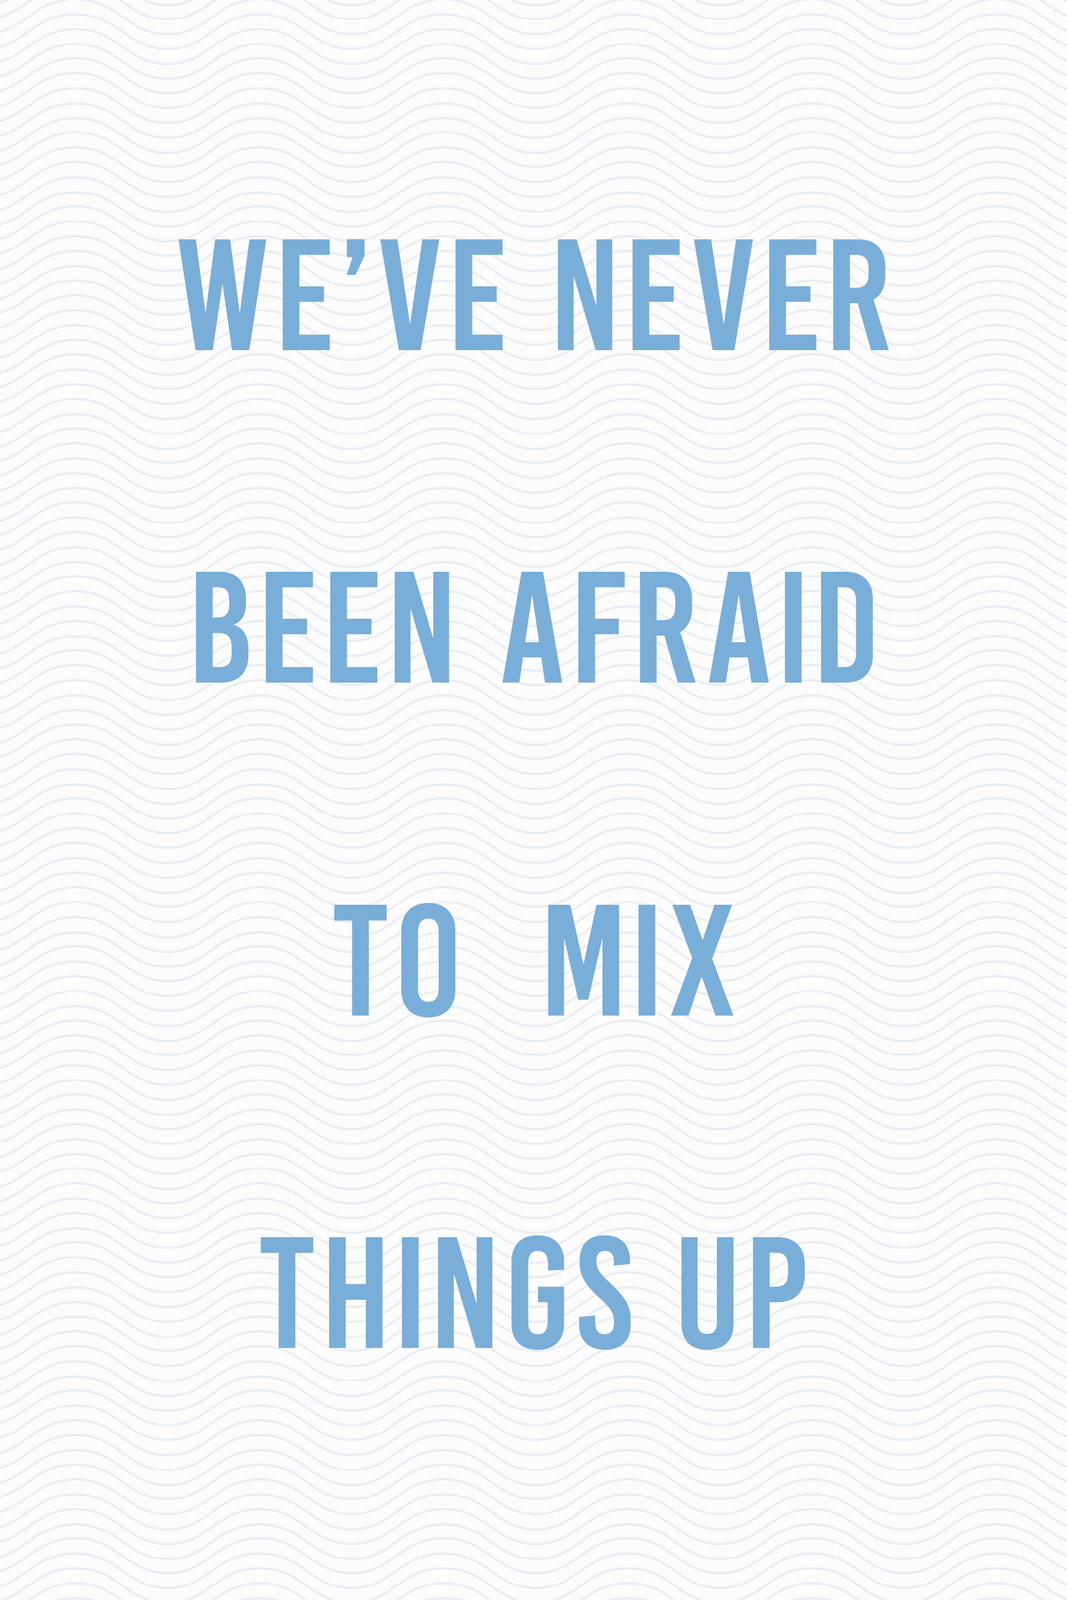 WE'VE NEVER BEEN AFRAID TO MIX THINGS UP quote for "Original by Tradition" campaign by CPB London